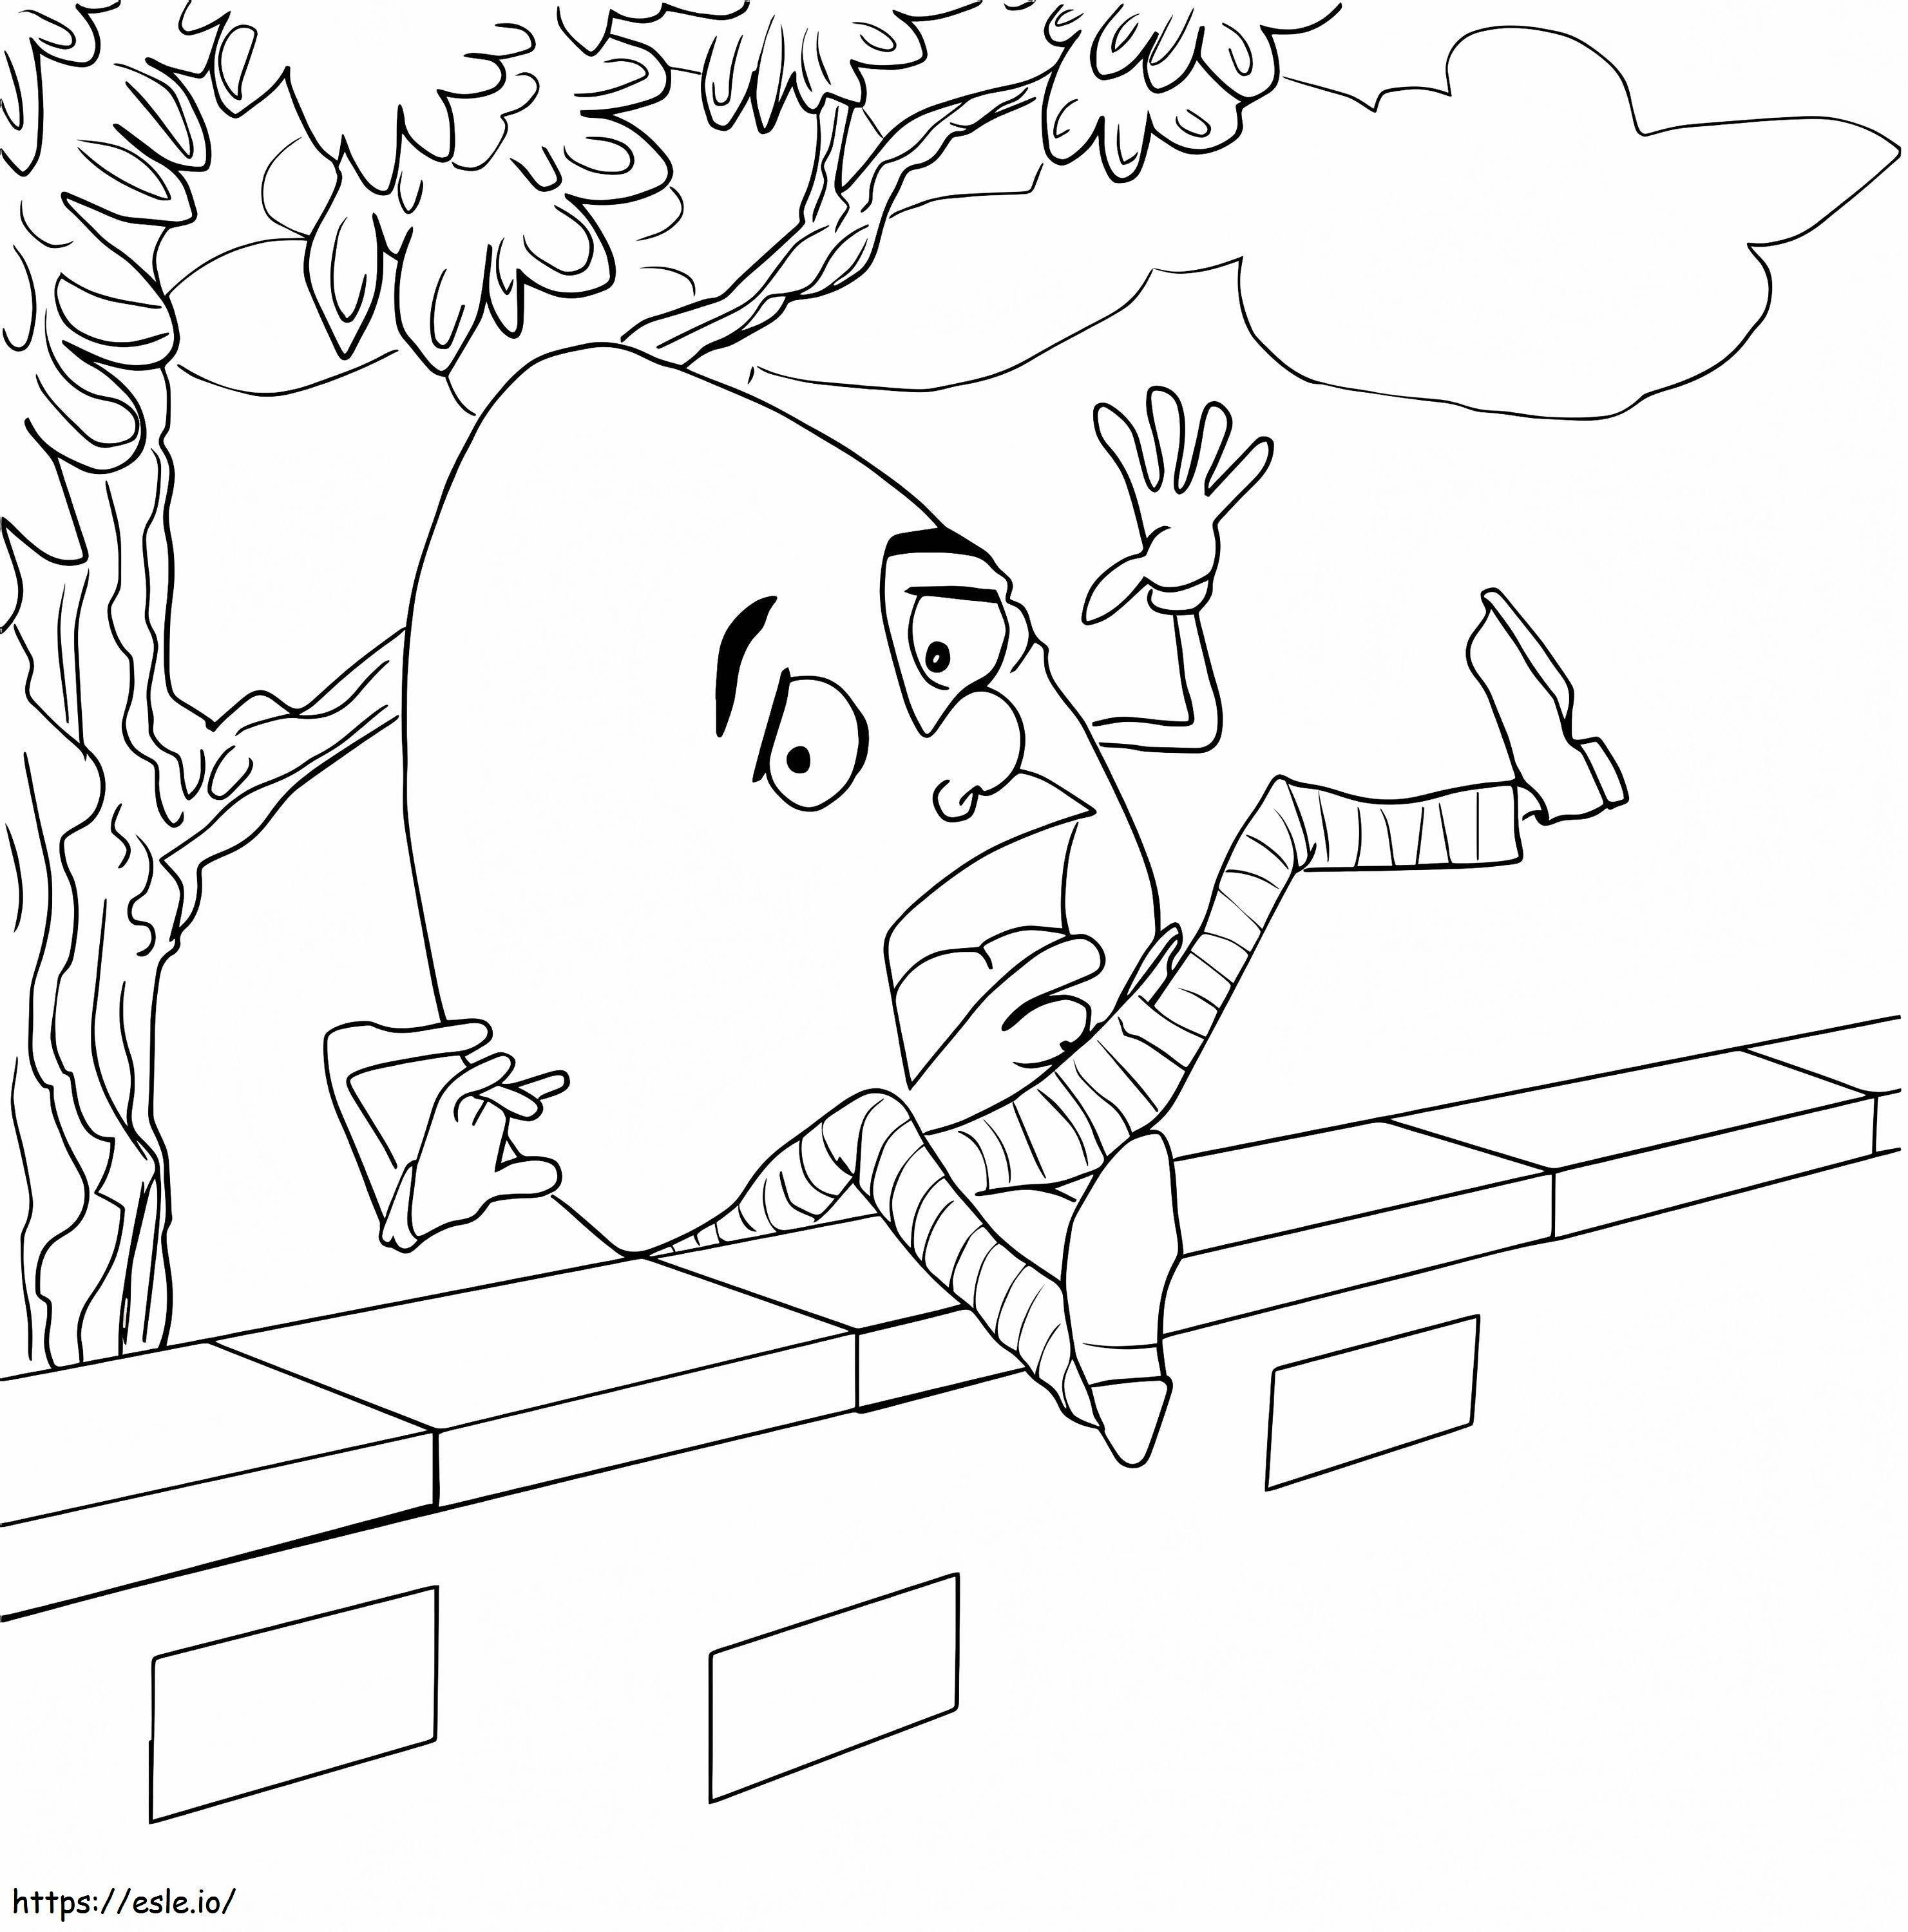 Humpty Dumpty Fell Off The Wall coloring page